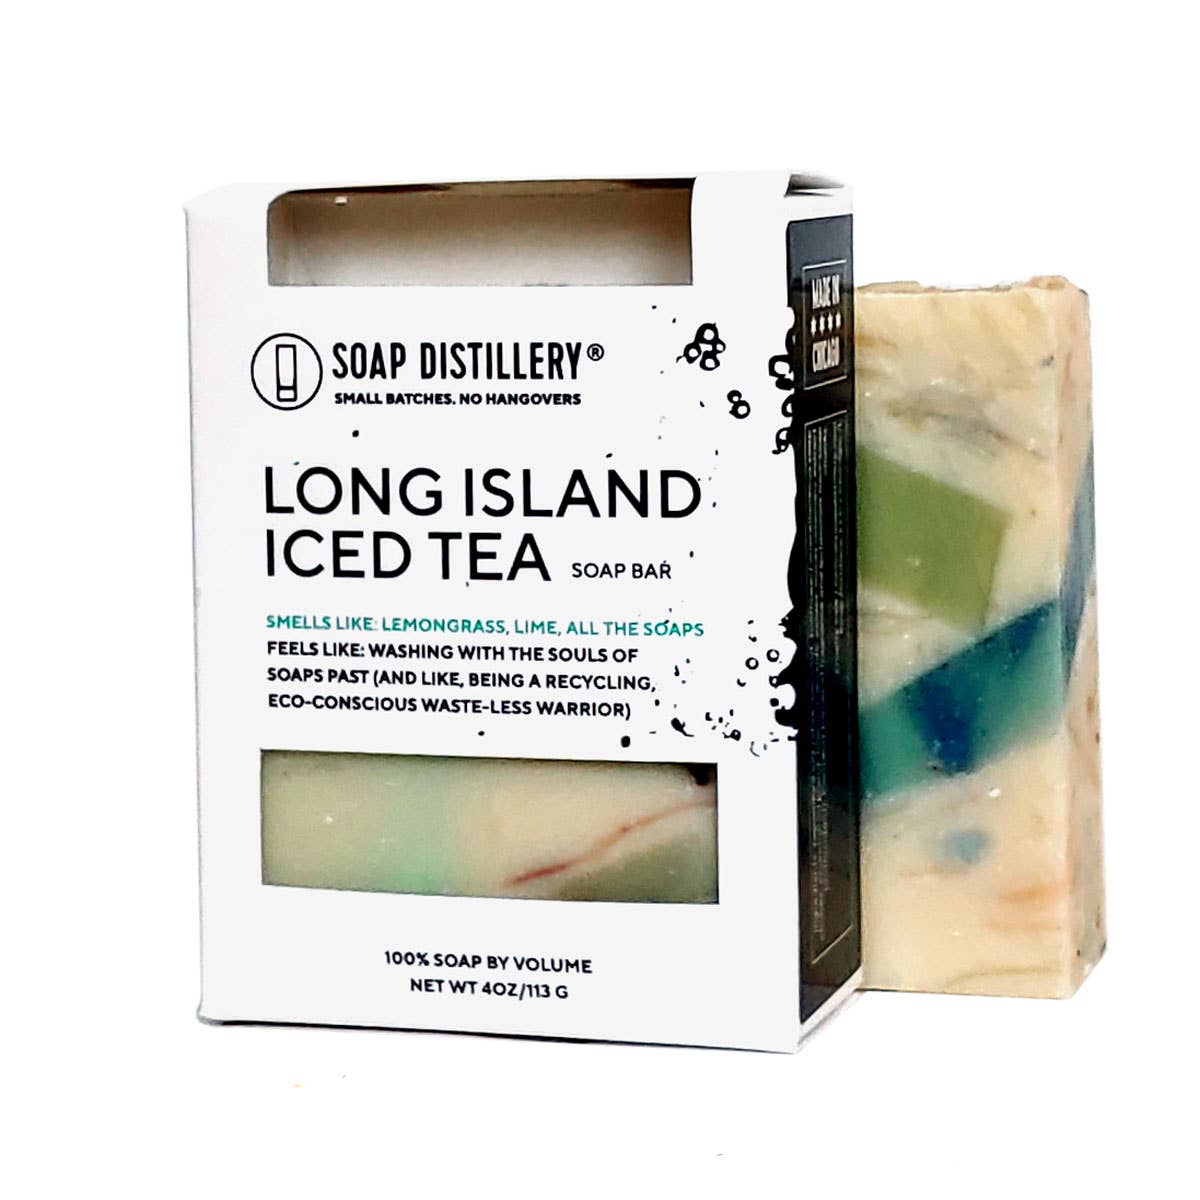 Photo of cream colored bar of soap with blue and green sections next to a packaged bar of soap in a black and white  box with a label that says "Long Island Iced Tea" with a description.